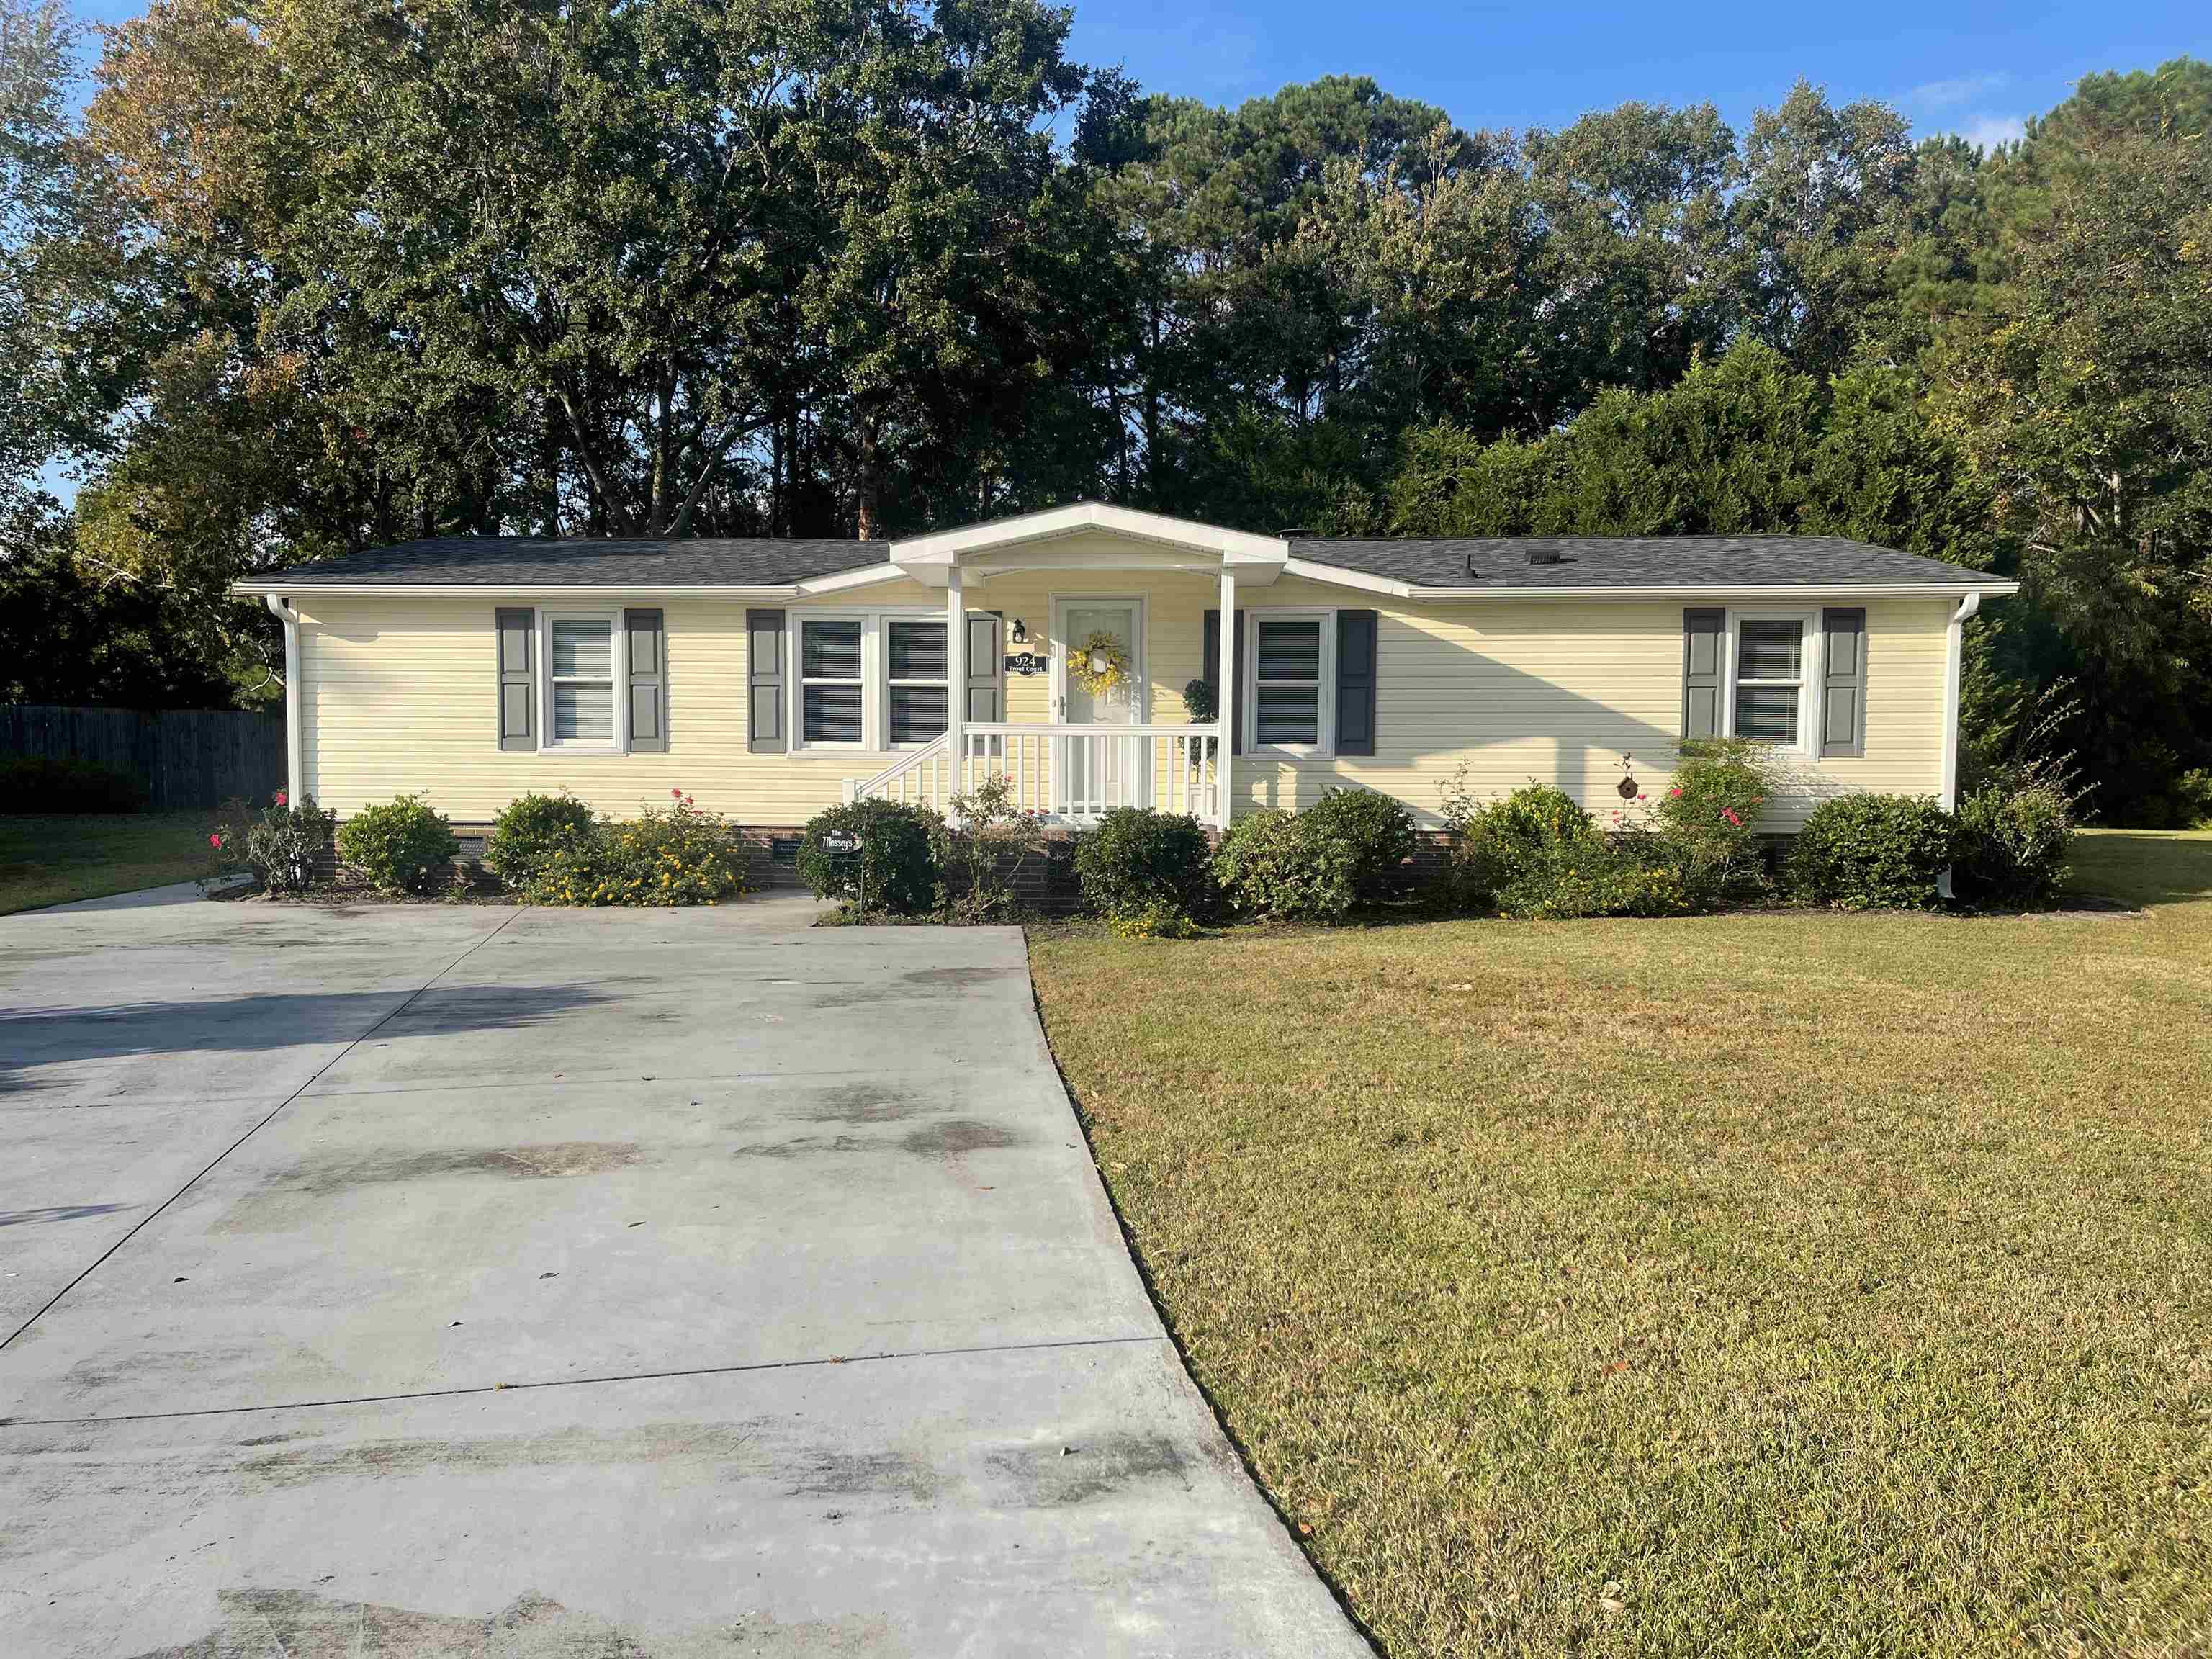 924 Trout Ct. Murrells Inlet, SC 29576